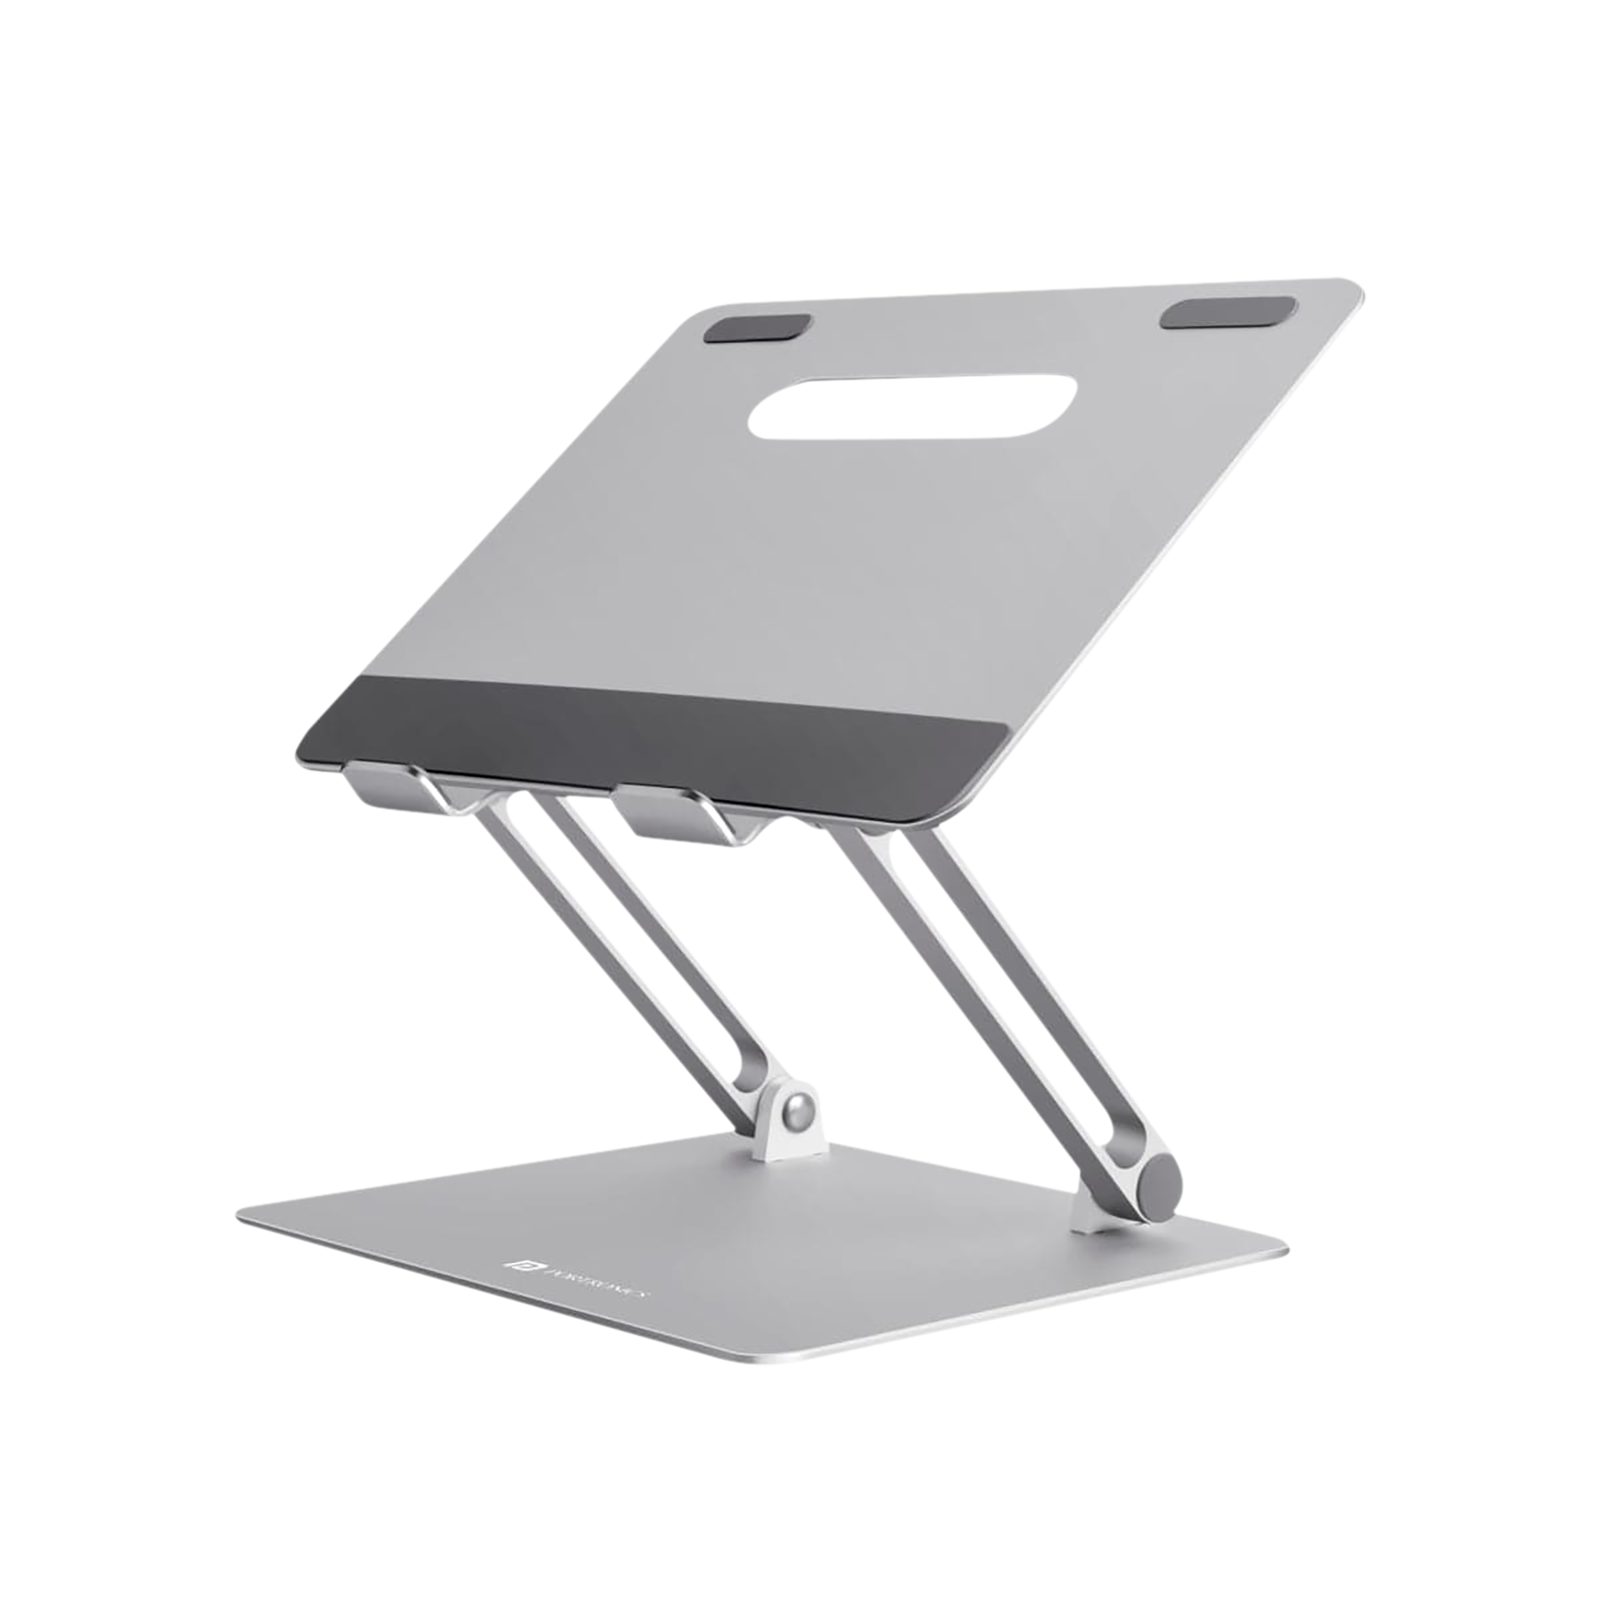 PORTRONICS My Buddy K3 Laptop Stand For Laptop & Tablet (Overheat Protection, POR 1417, Silver)